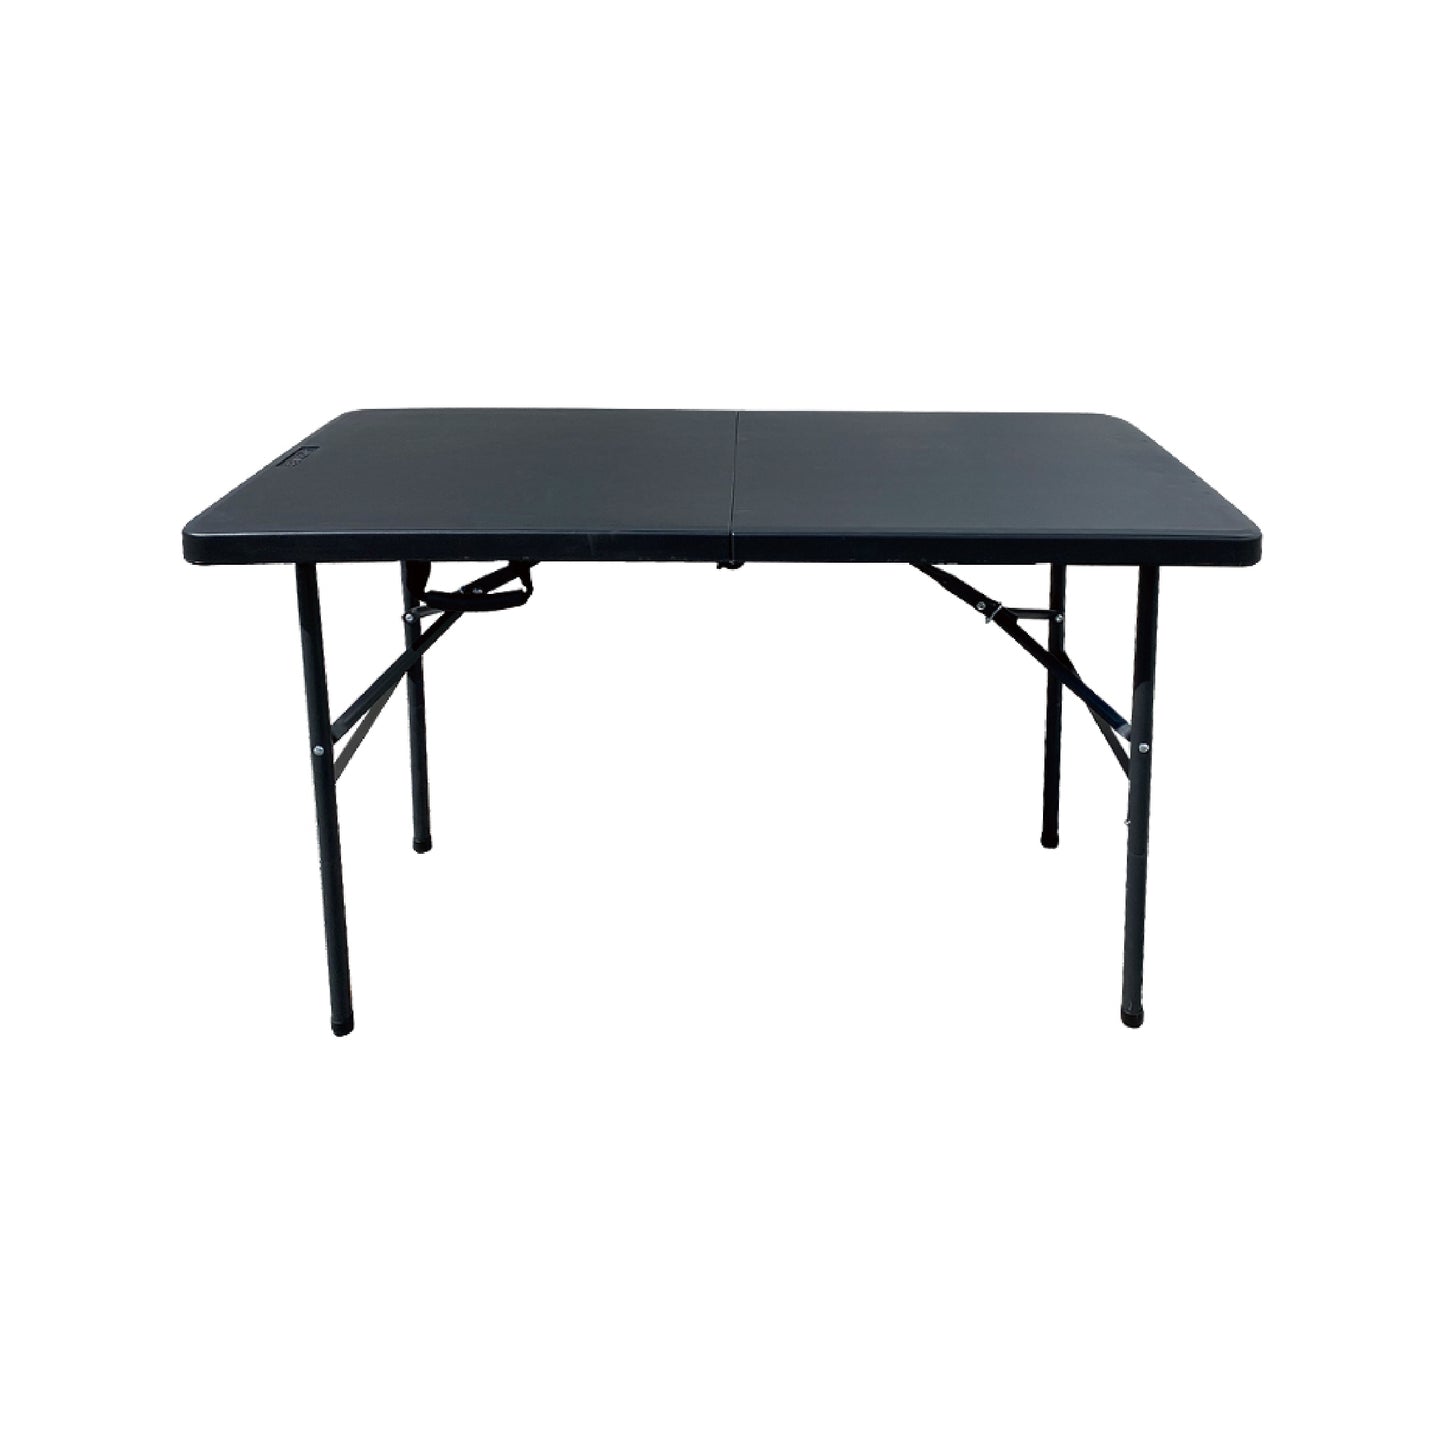 FOLDING TABLE FOSTER military style portable folding table